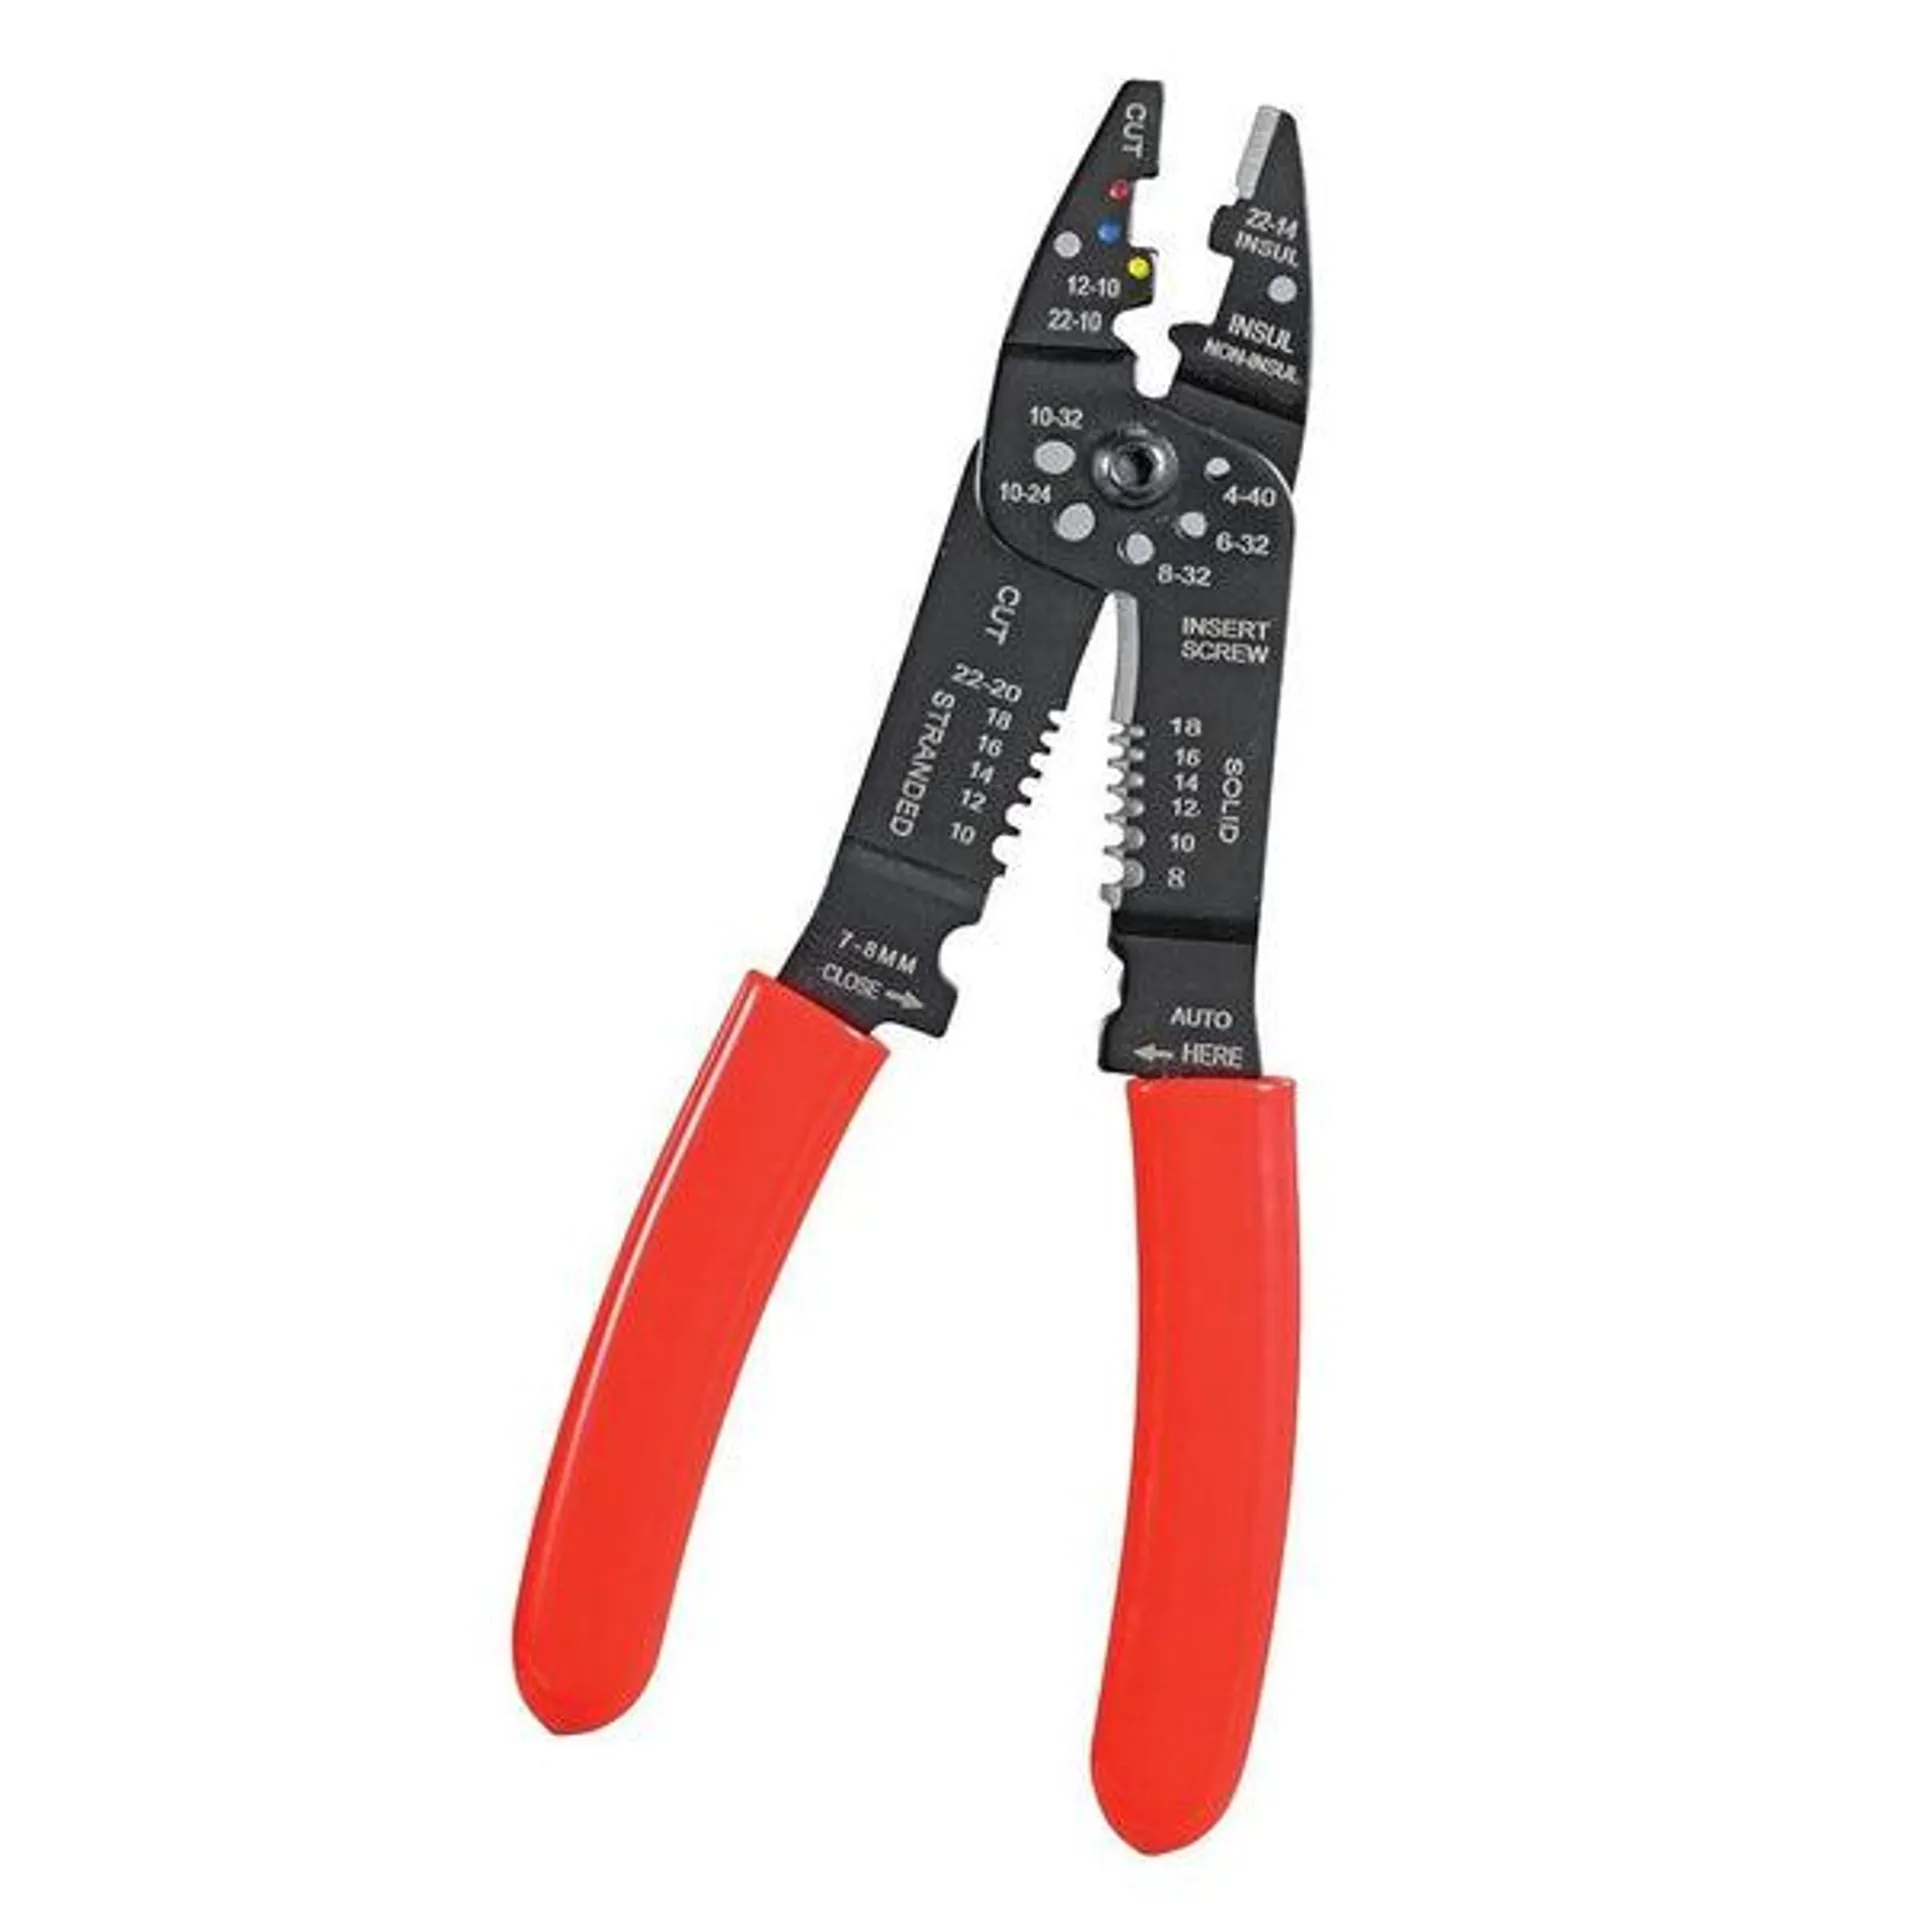 RadioShack 8" Multi-Purpose Wire Stripper/Cutter and Crimping Tool, 10-22 AWG